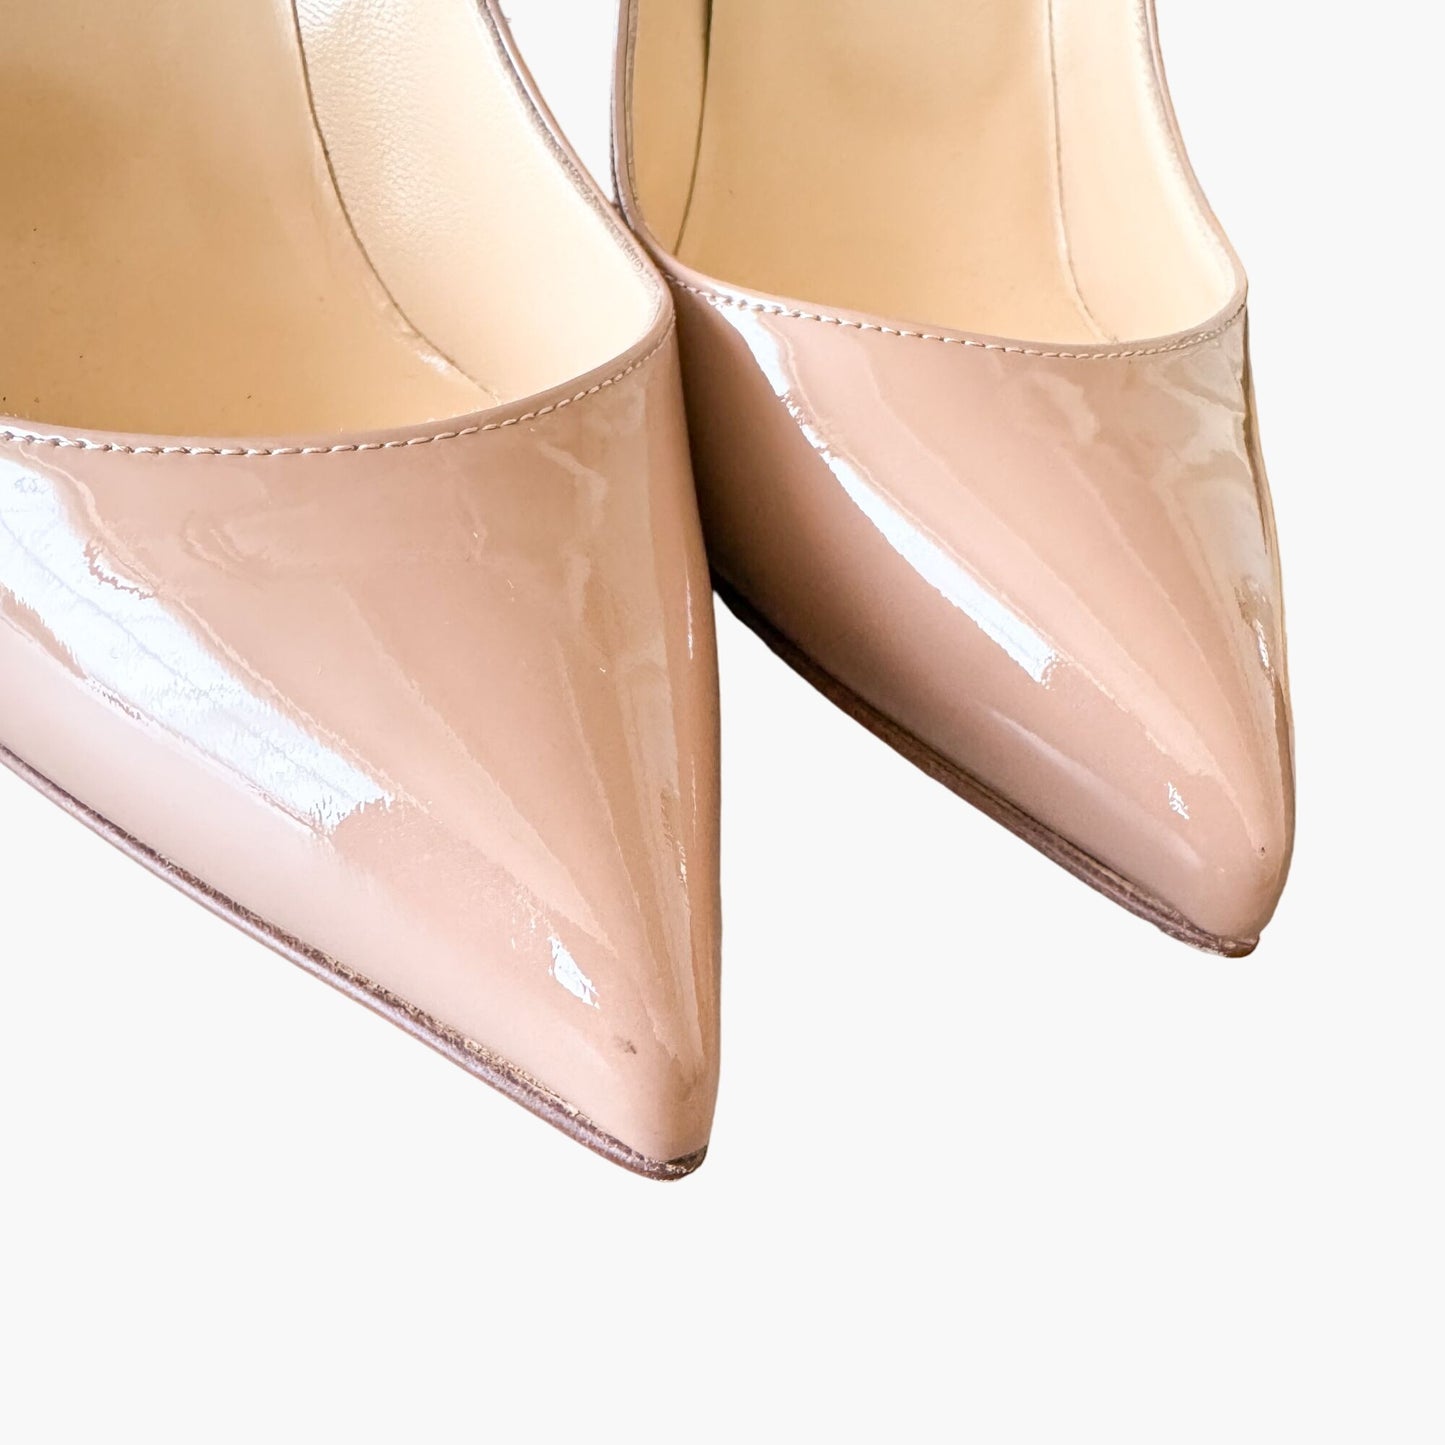 Christian Louboutin Pigalle Follies 100 Pumps in Nude Patent Size 38.5